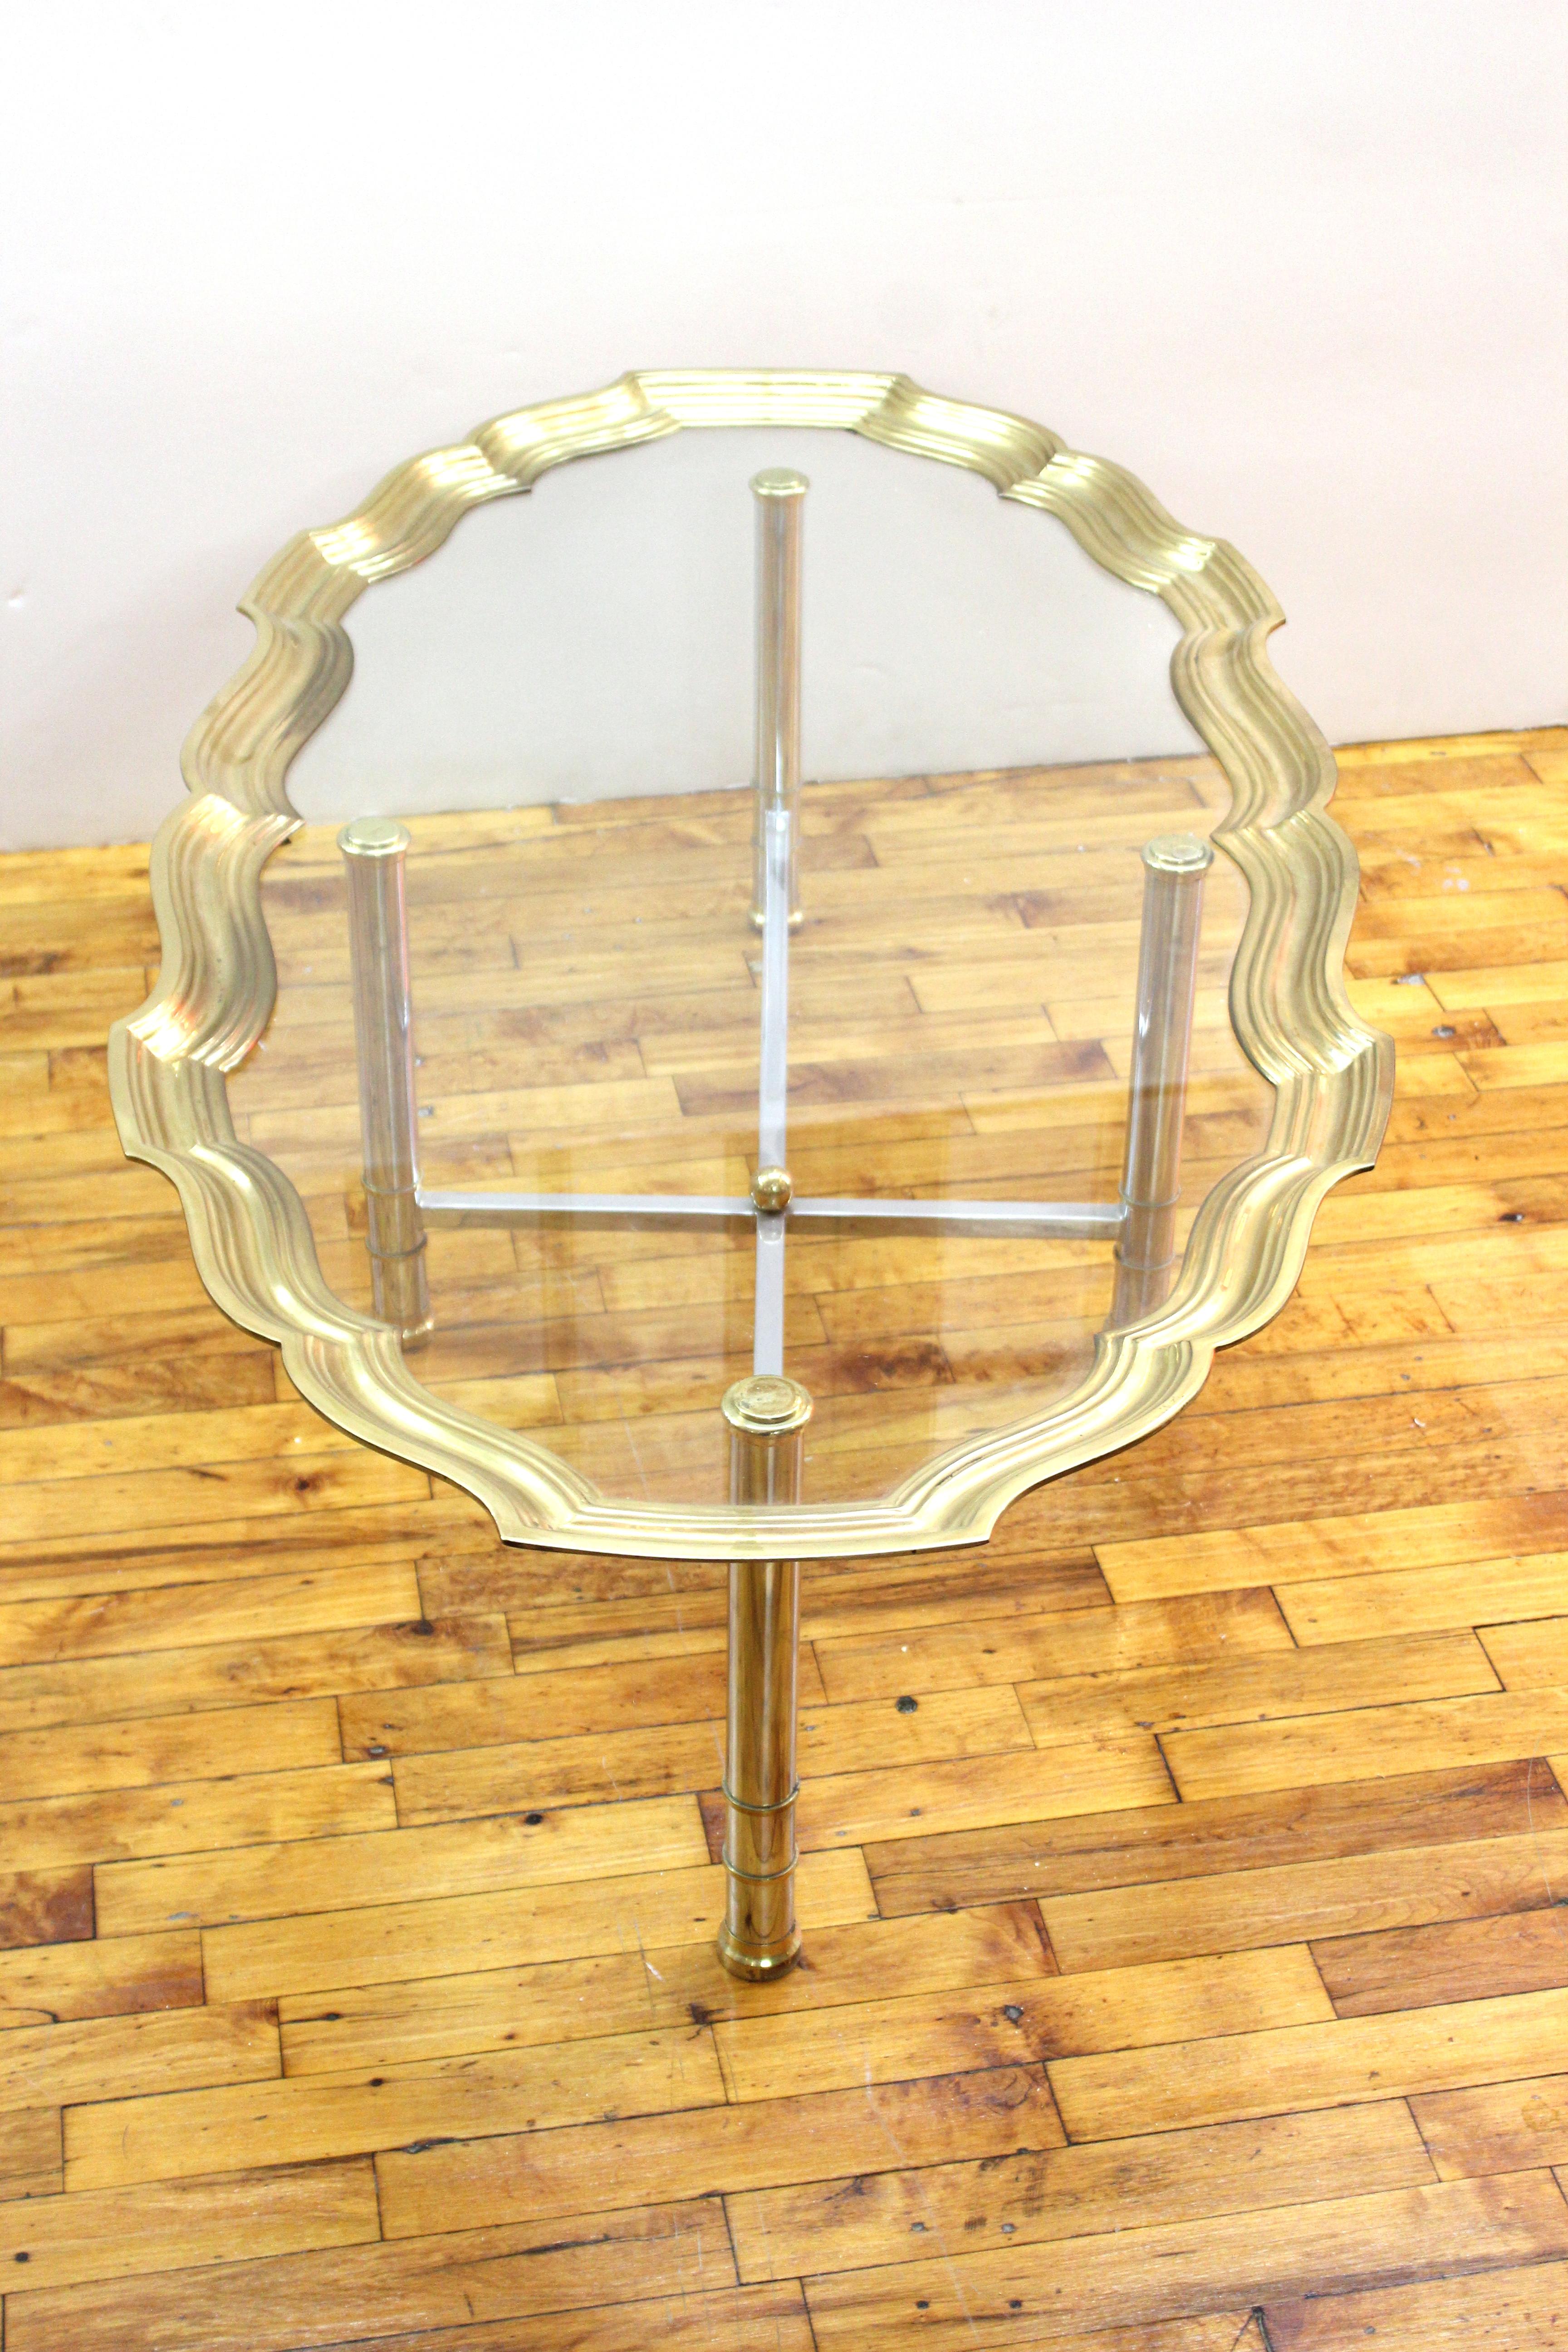 labarge brass coffee table